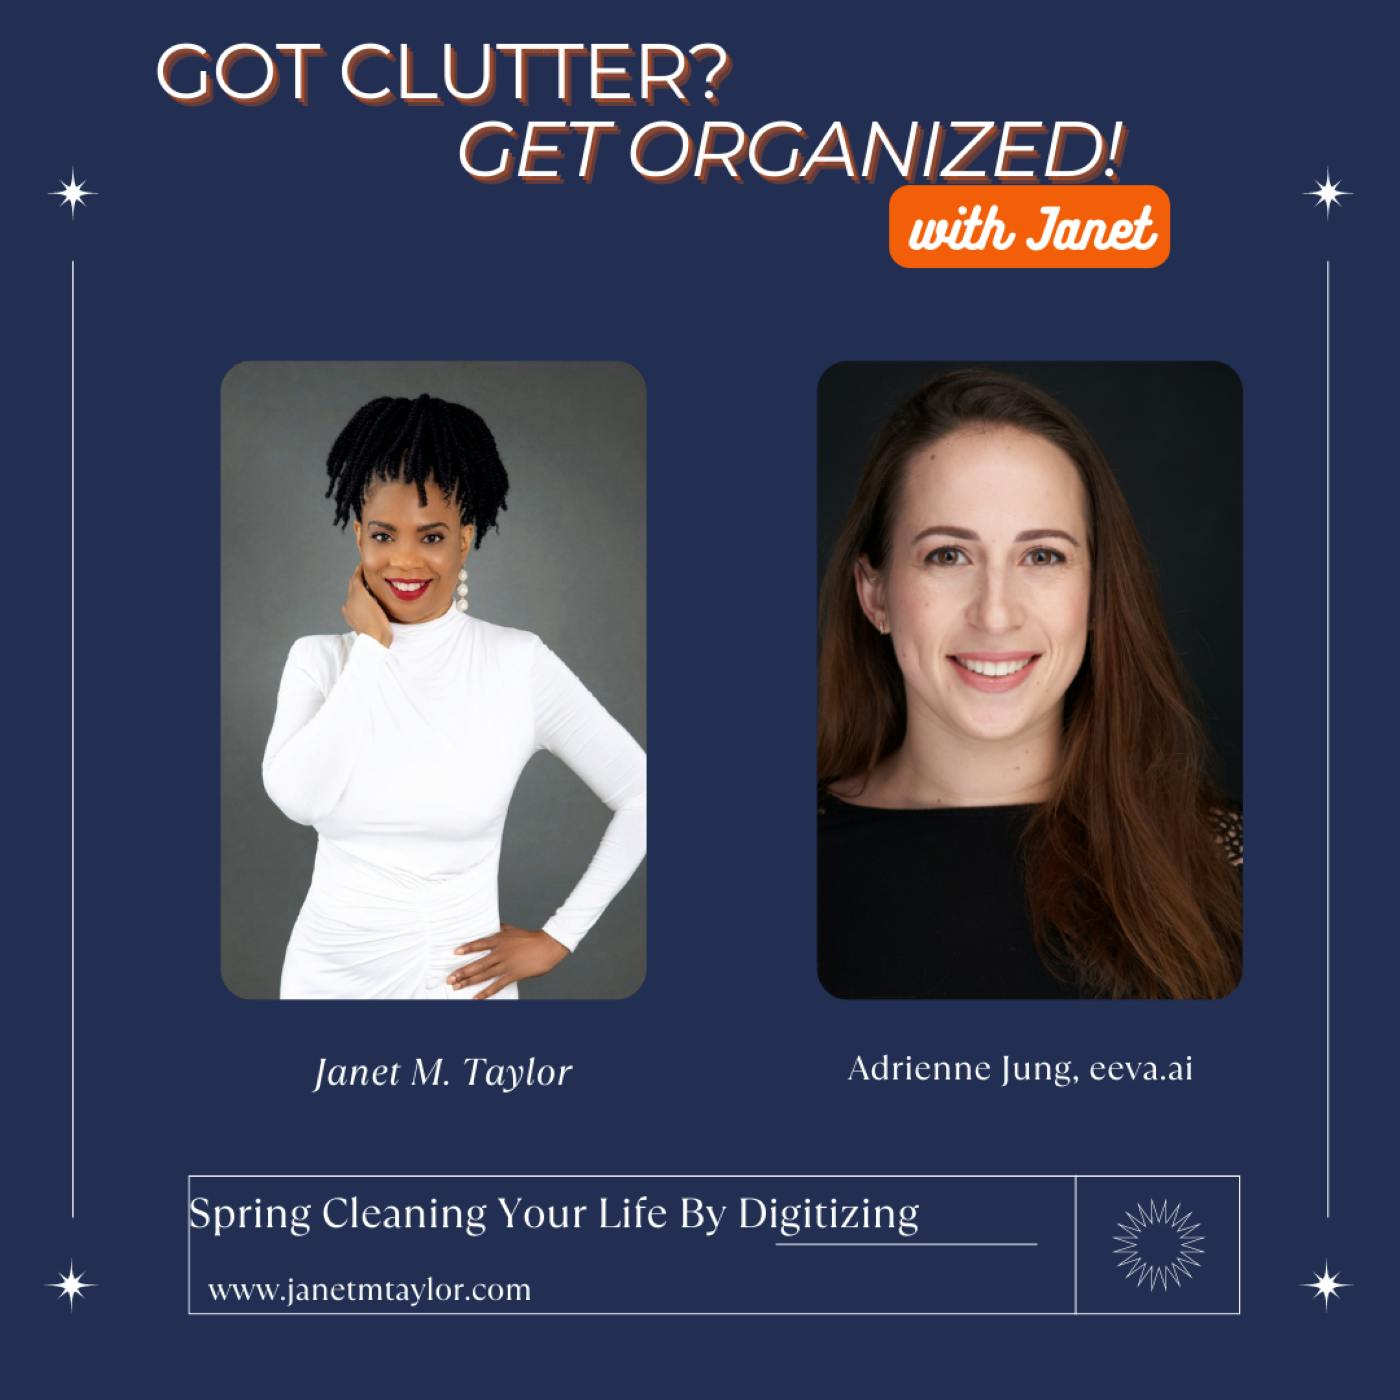 Spring Cleaning Your Life By Digitizing with Adrienne Jung